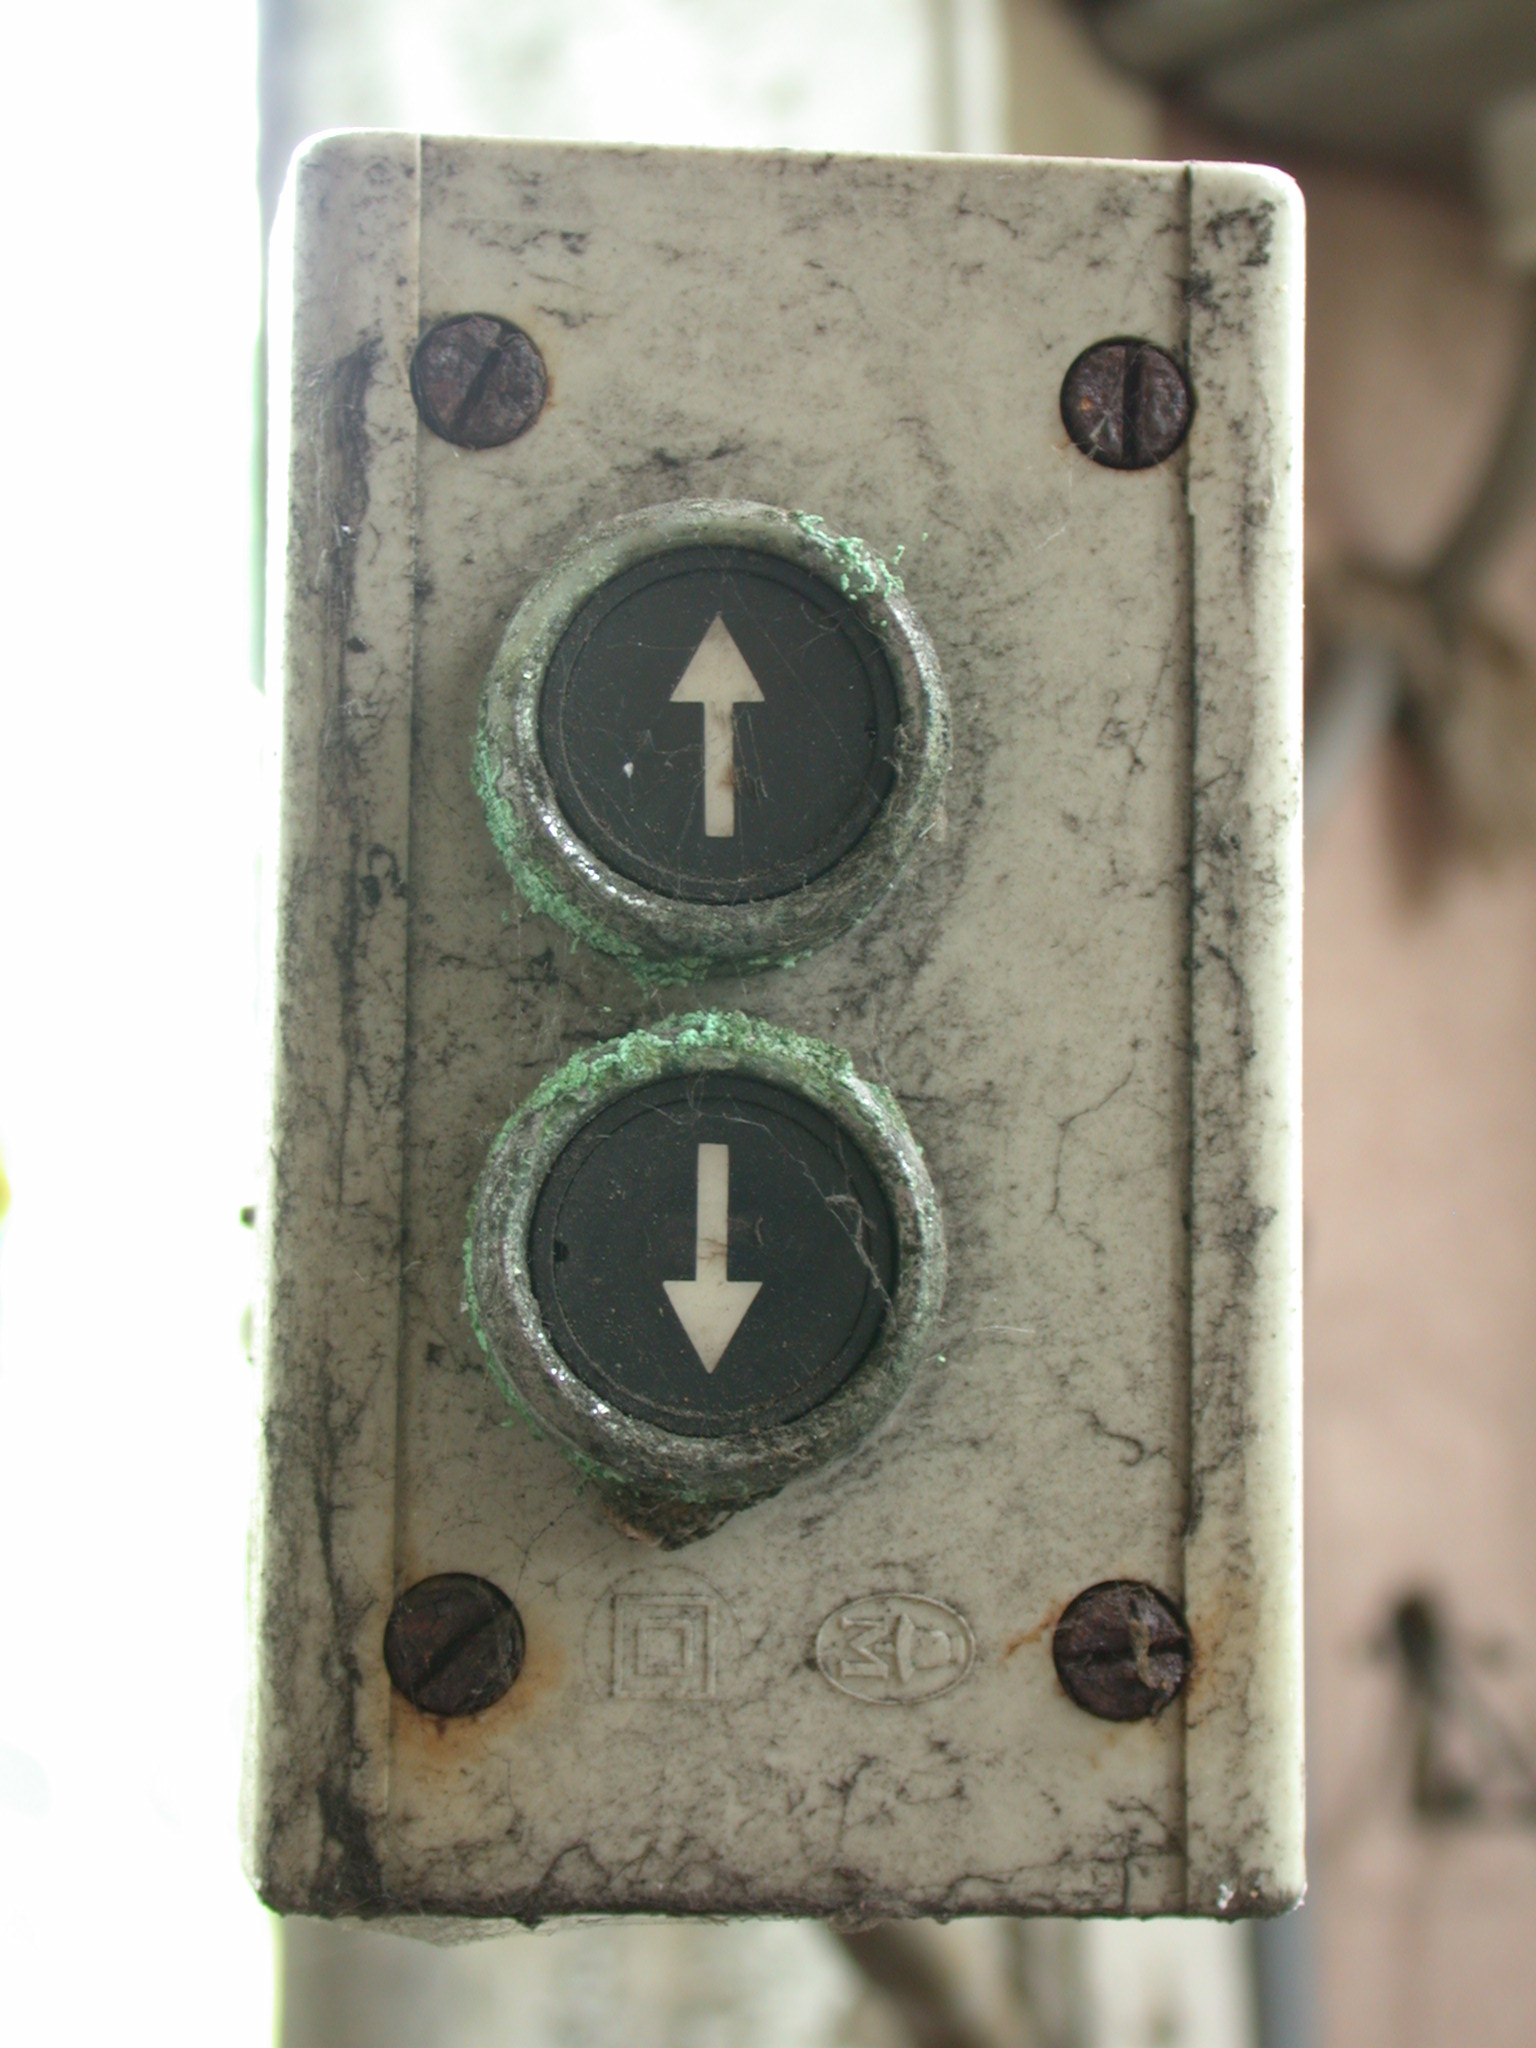 lift button buttons round arrow pointing up down switches